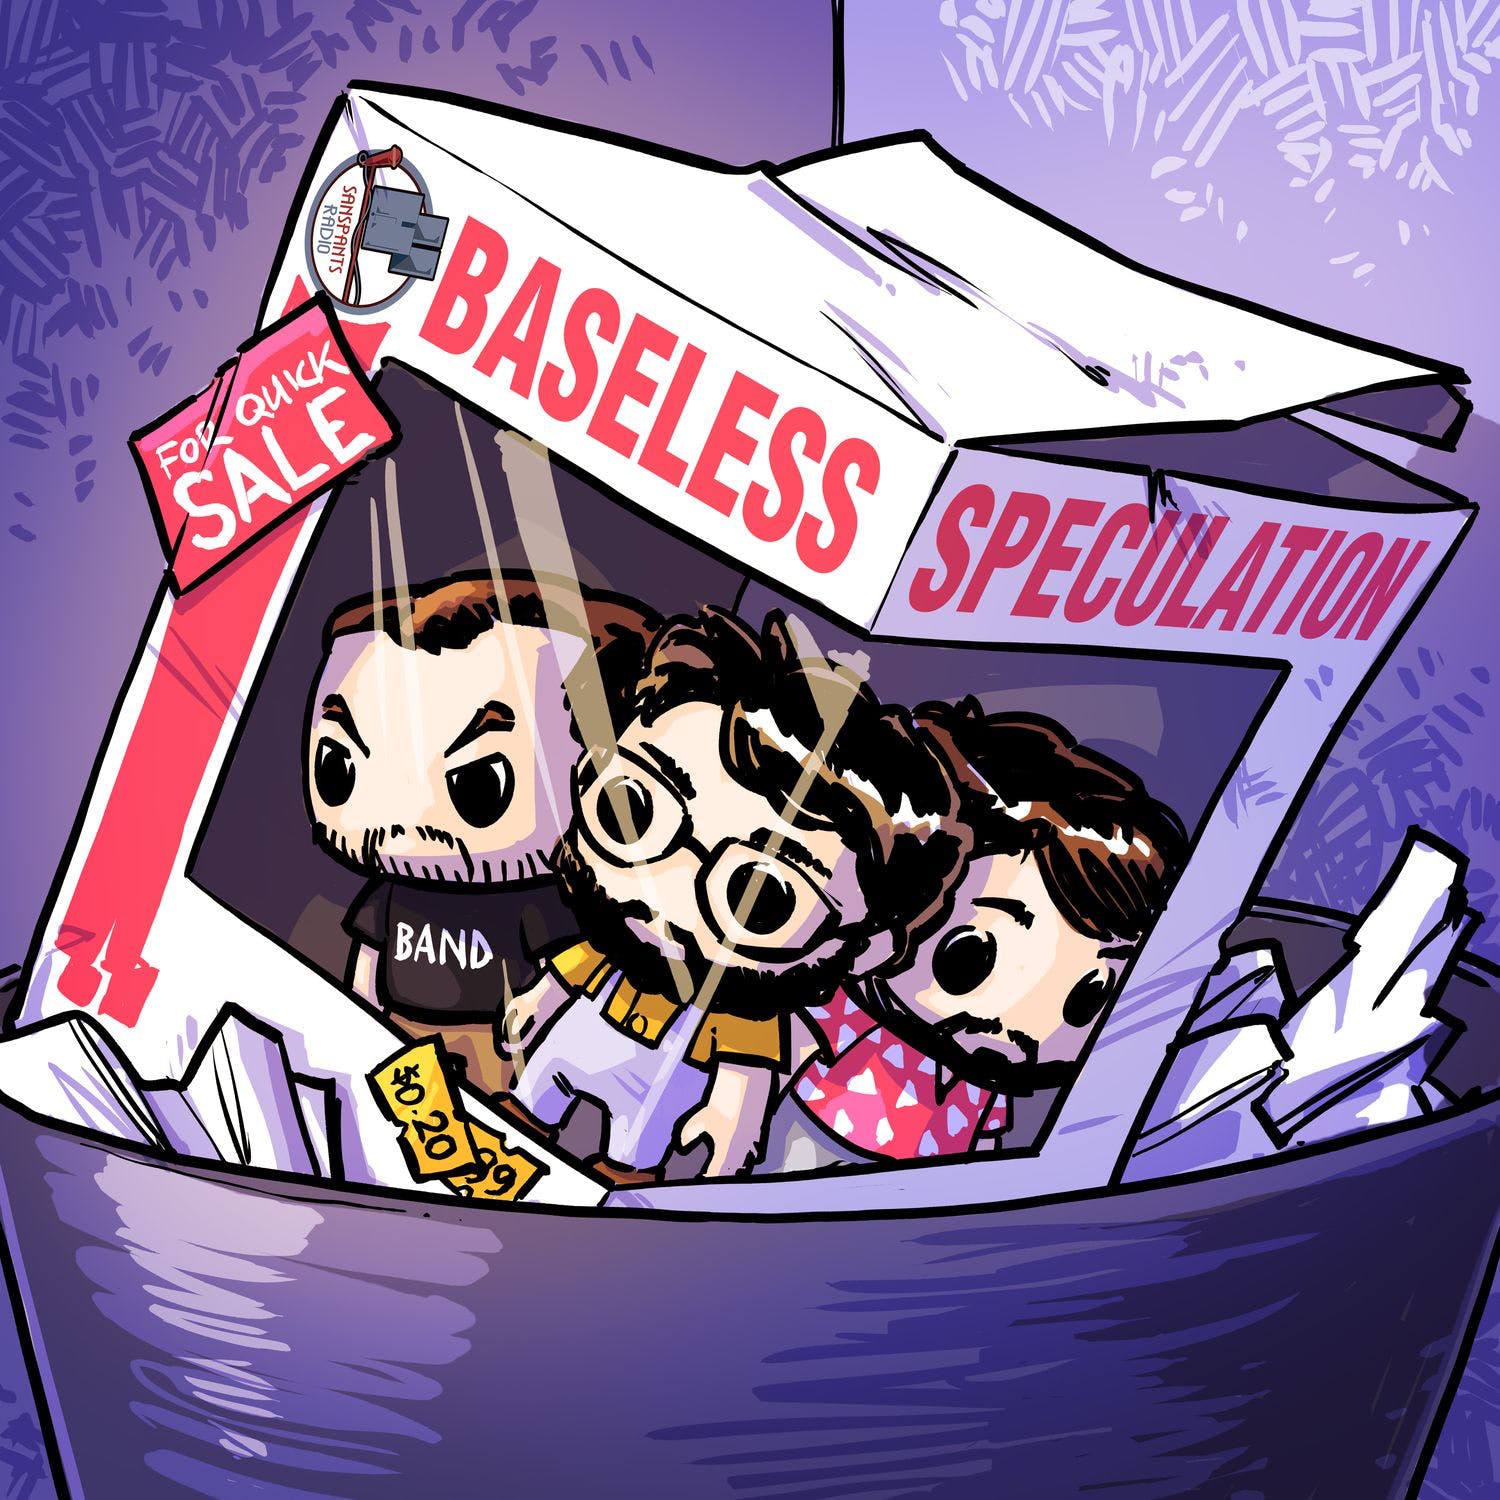 Baseless Speculation Emails (End of Year Special)